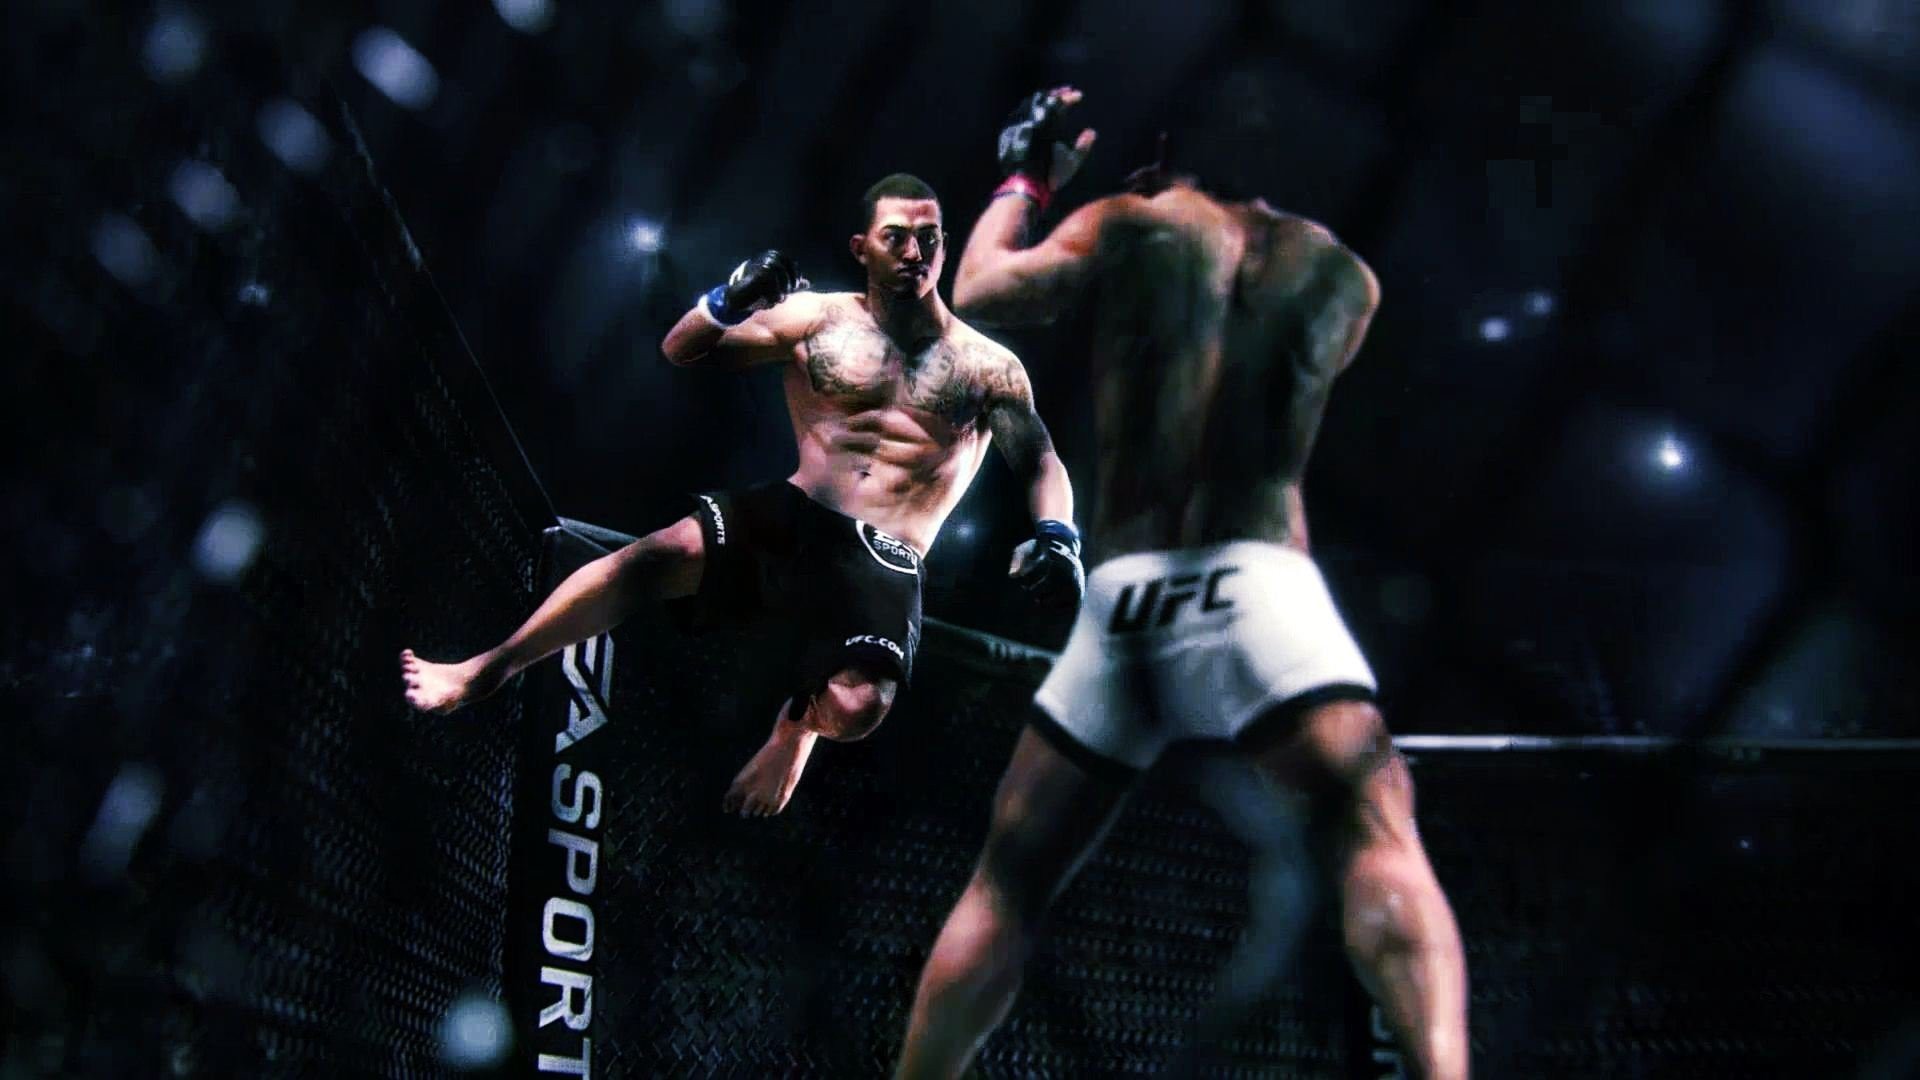 UFC Fighters Wallpaper (78+ images)